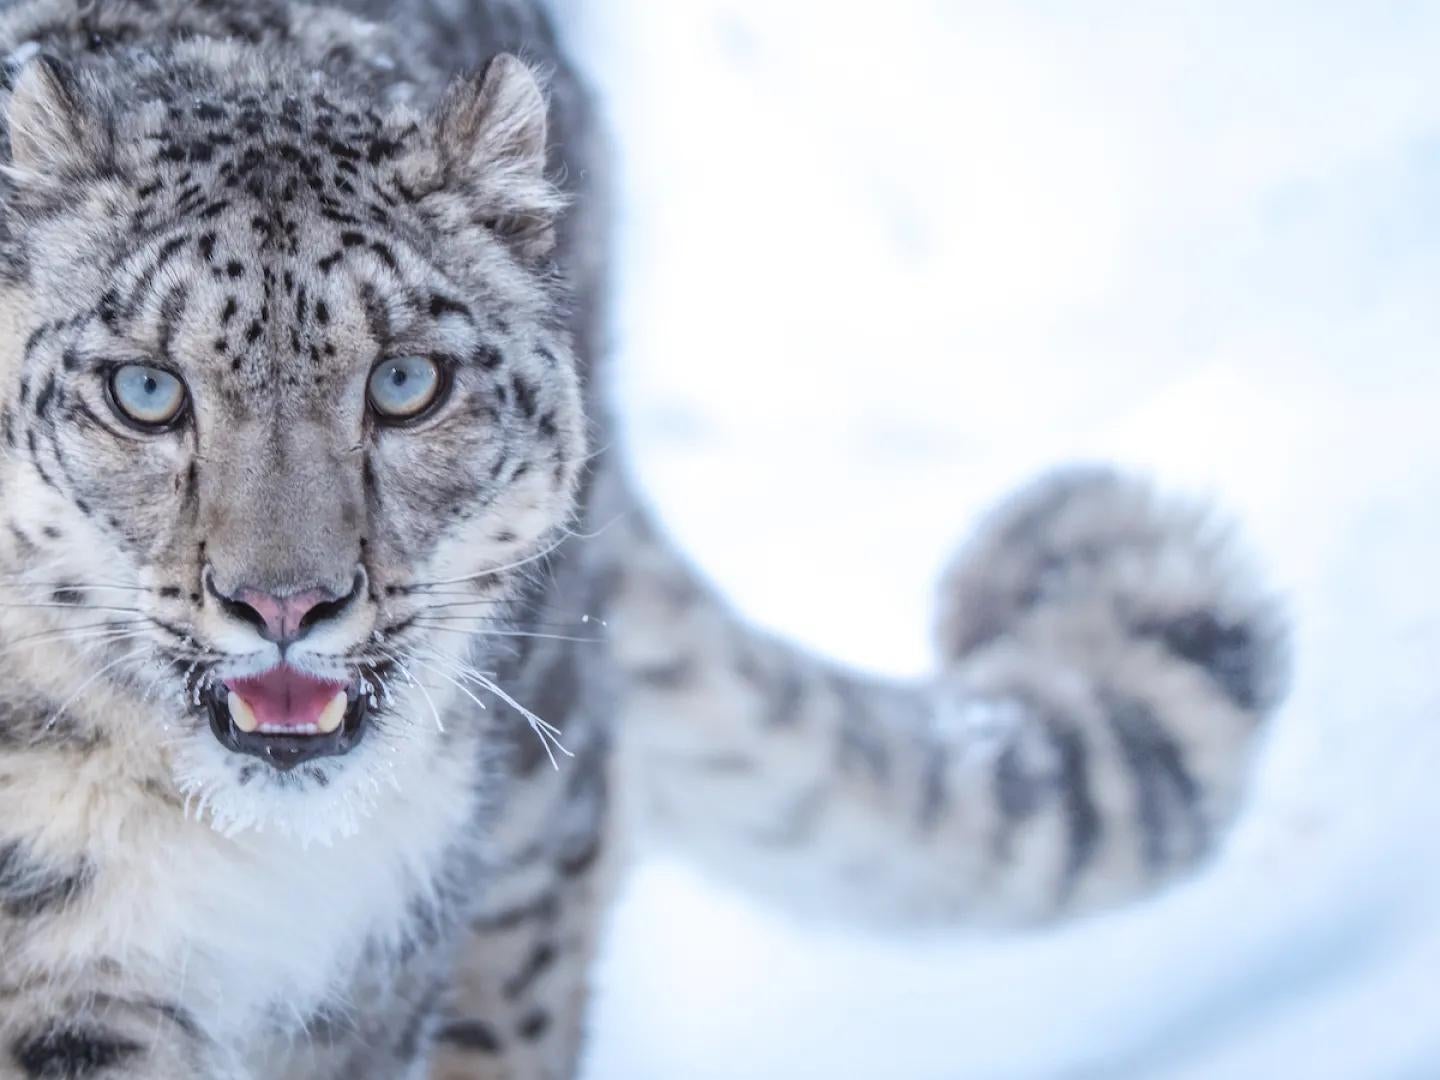 Pernod Ricard Russia's Preserving the Snow Leopard program